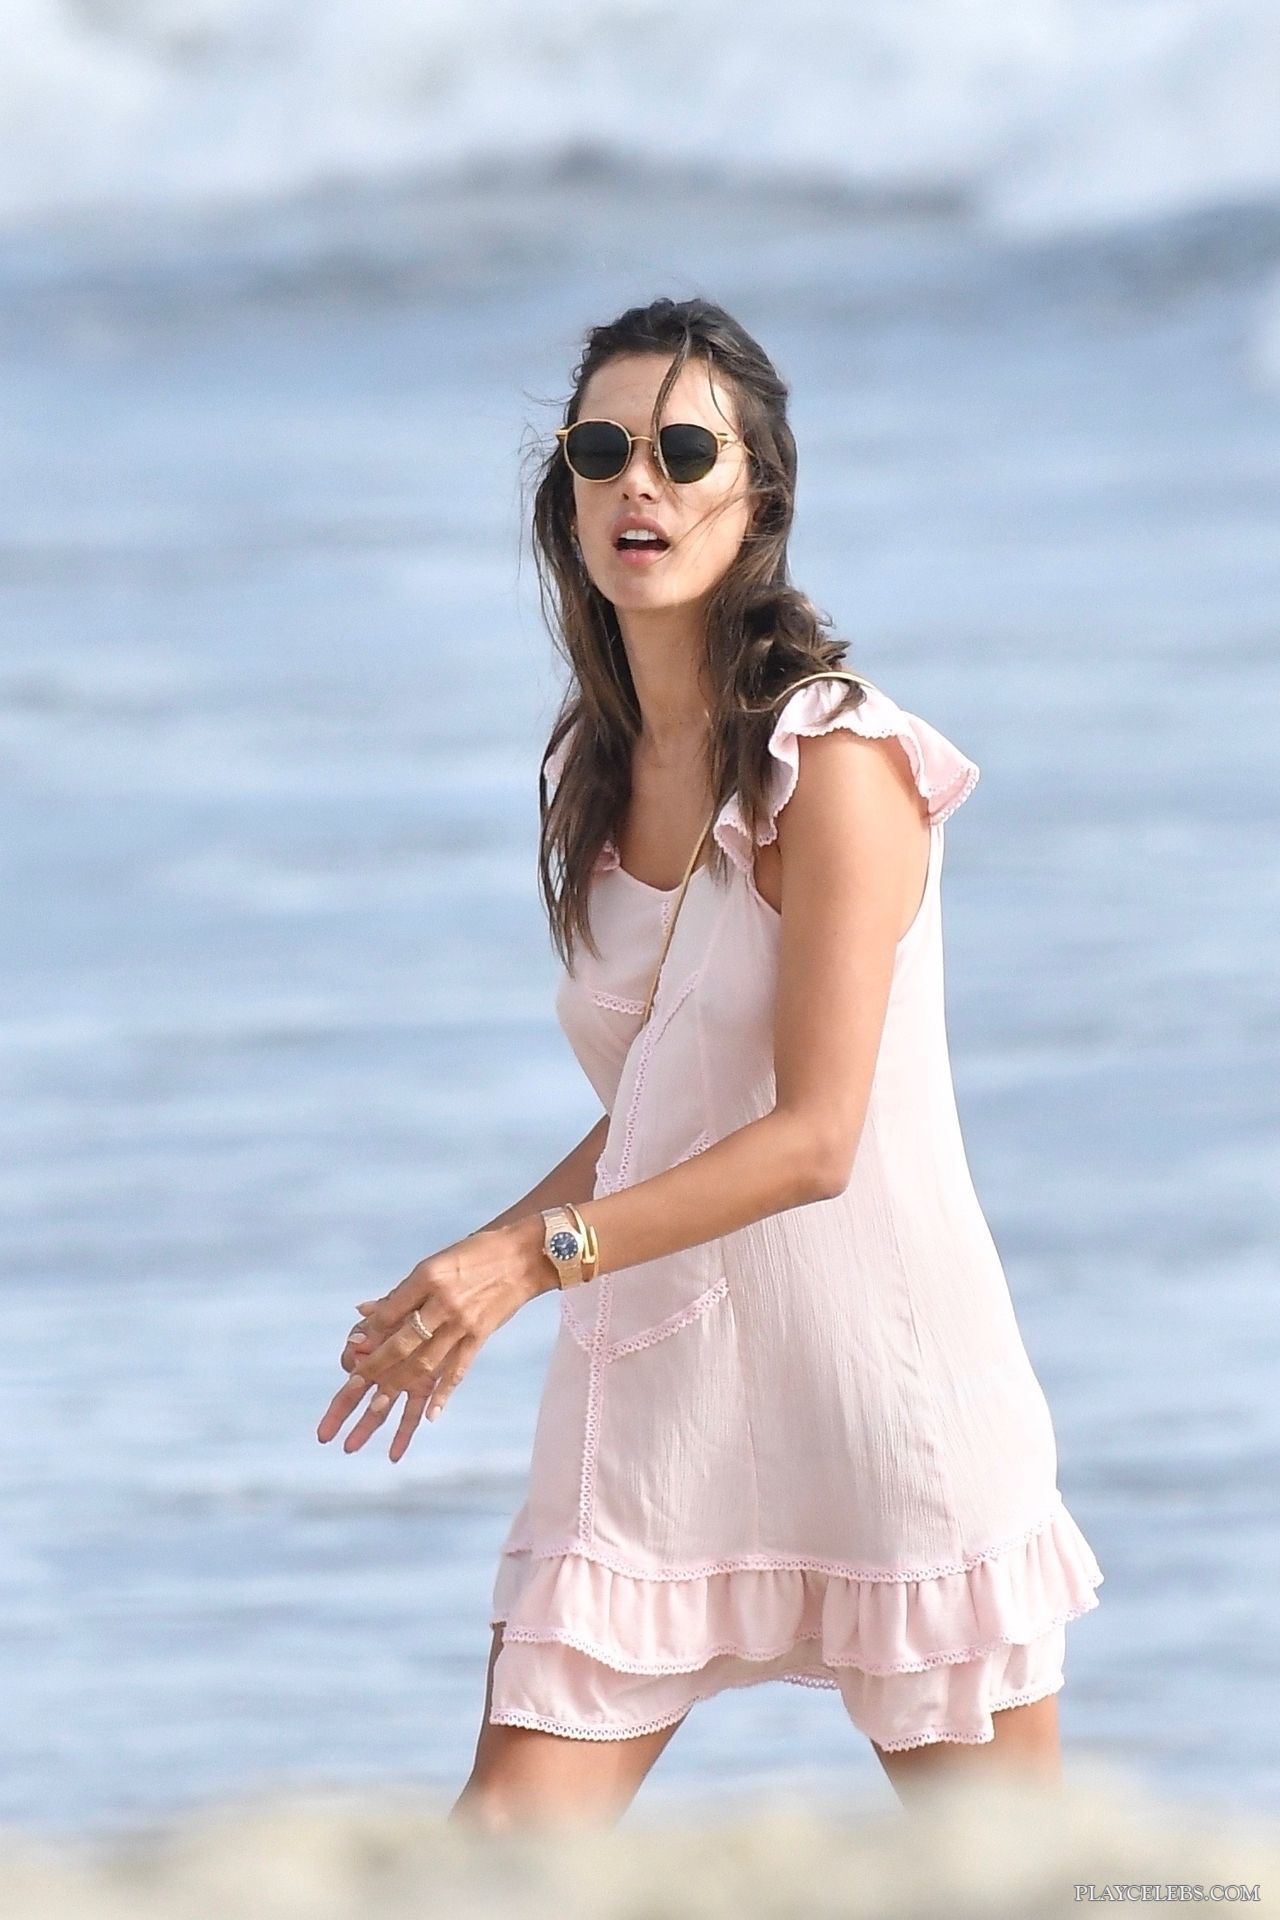 You are currently viewing Alessandra Ambrosio See Through Beach Photos